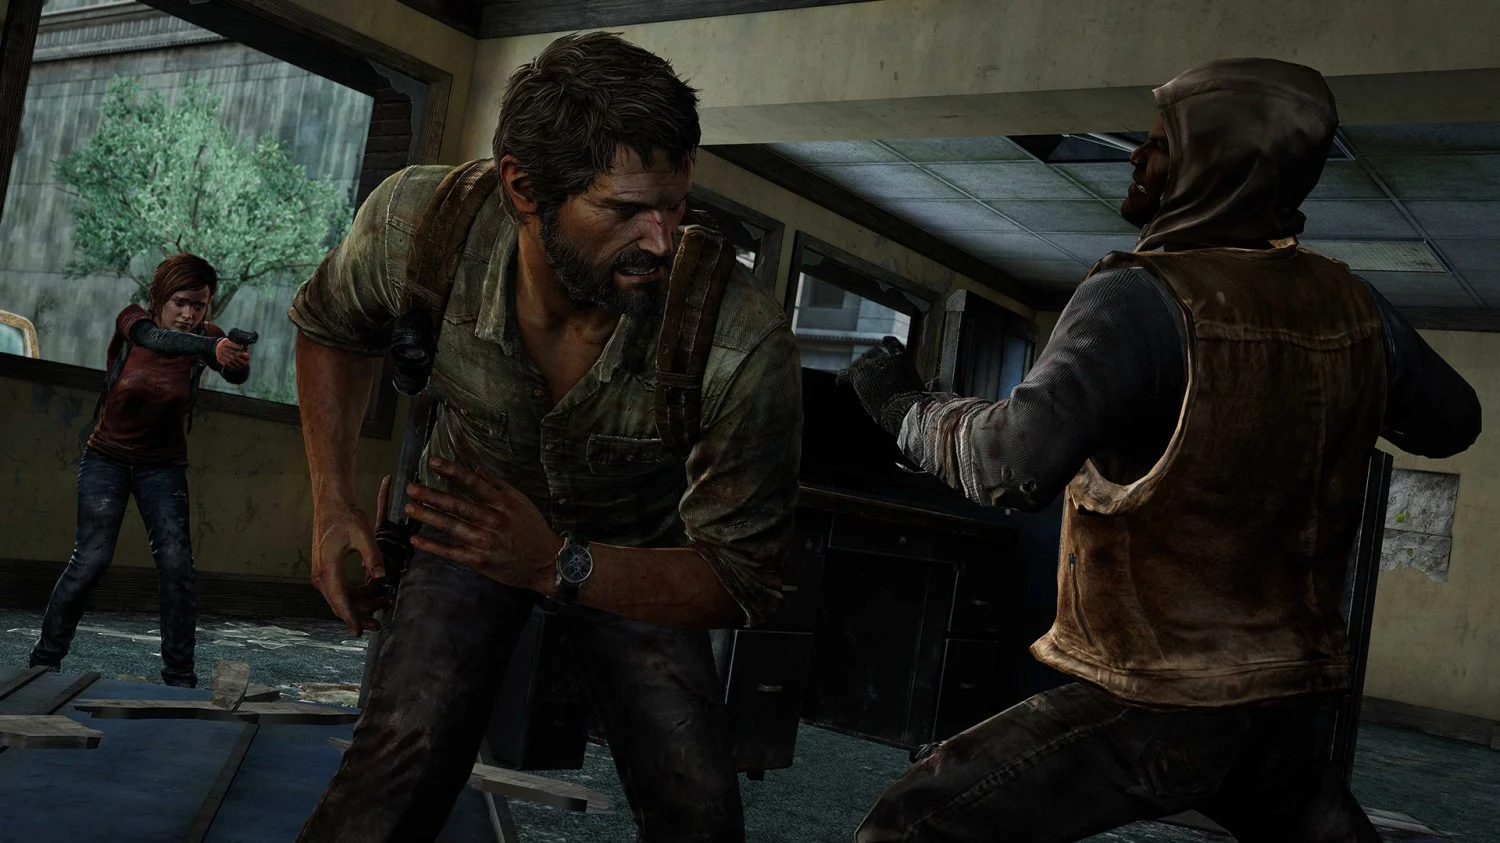 Jogo The Last Of Us Remastered PS4